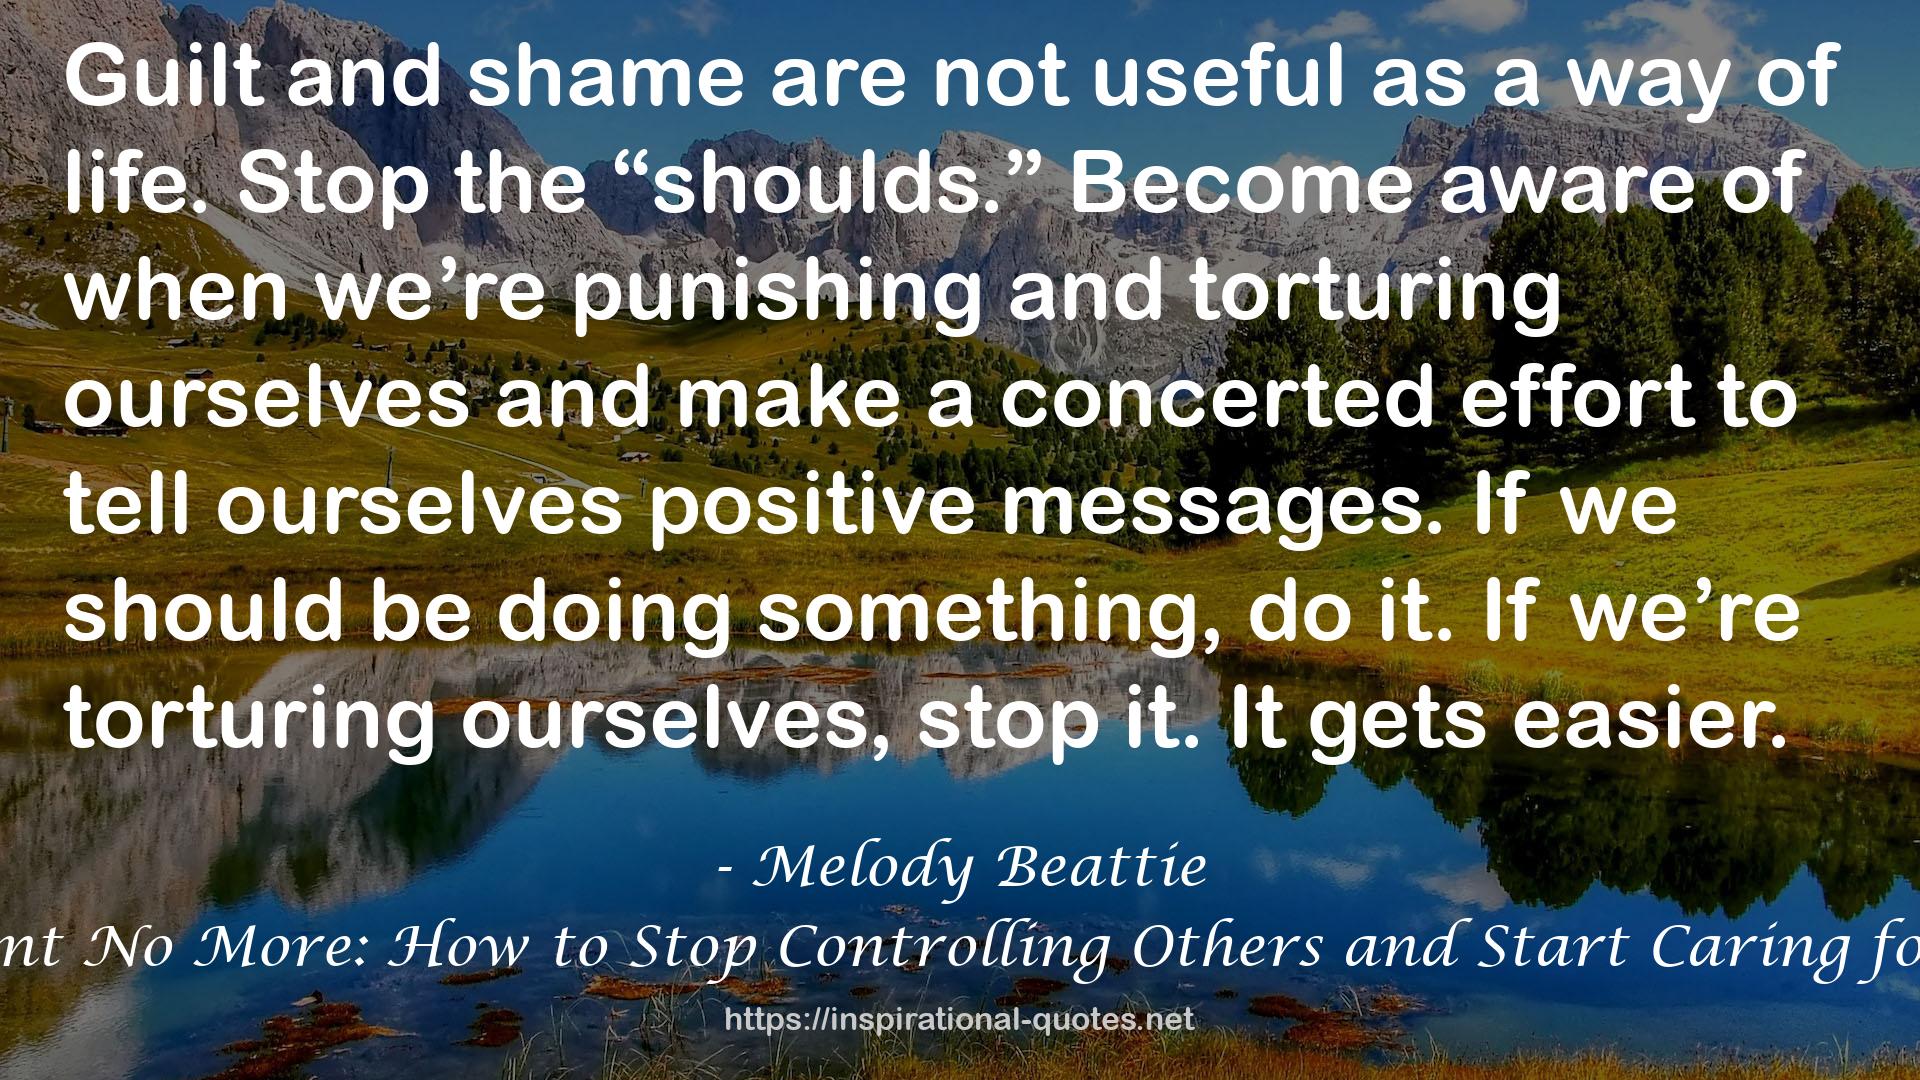 Codependent No More: How to Stop Controlling Others and Start Caring for Yourself QUOTES